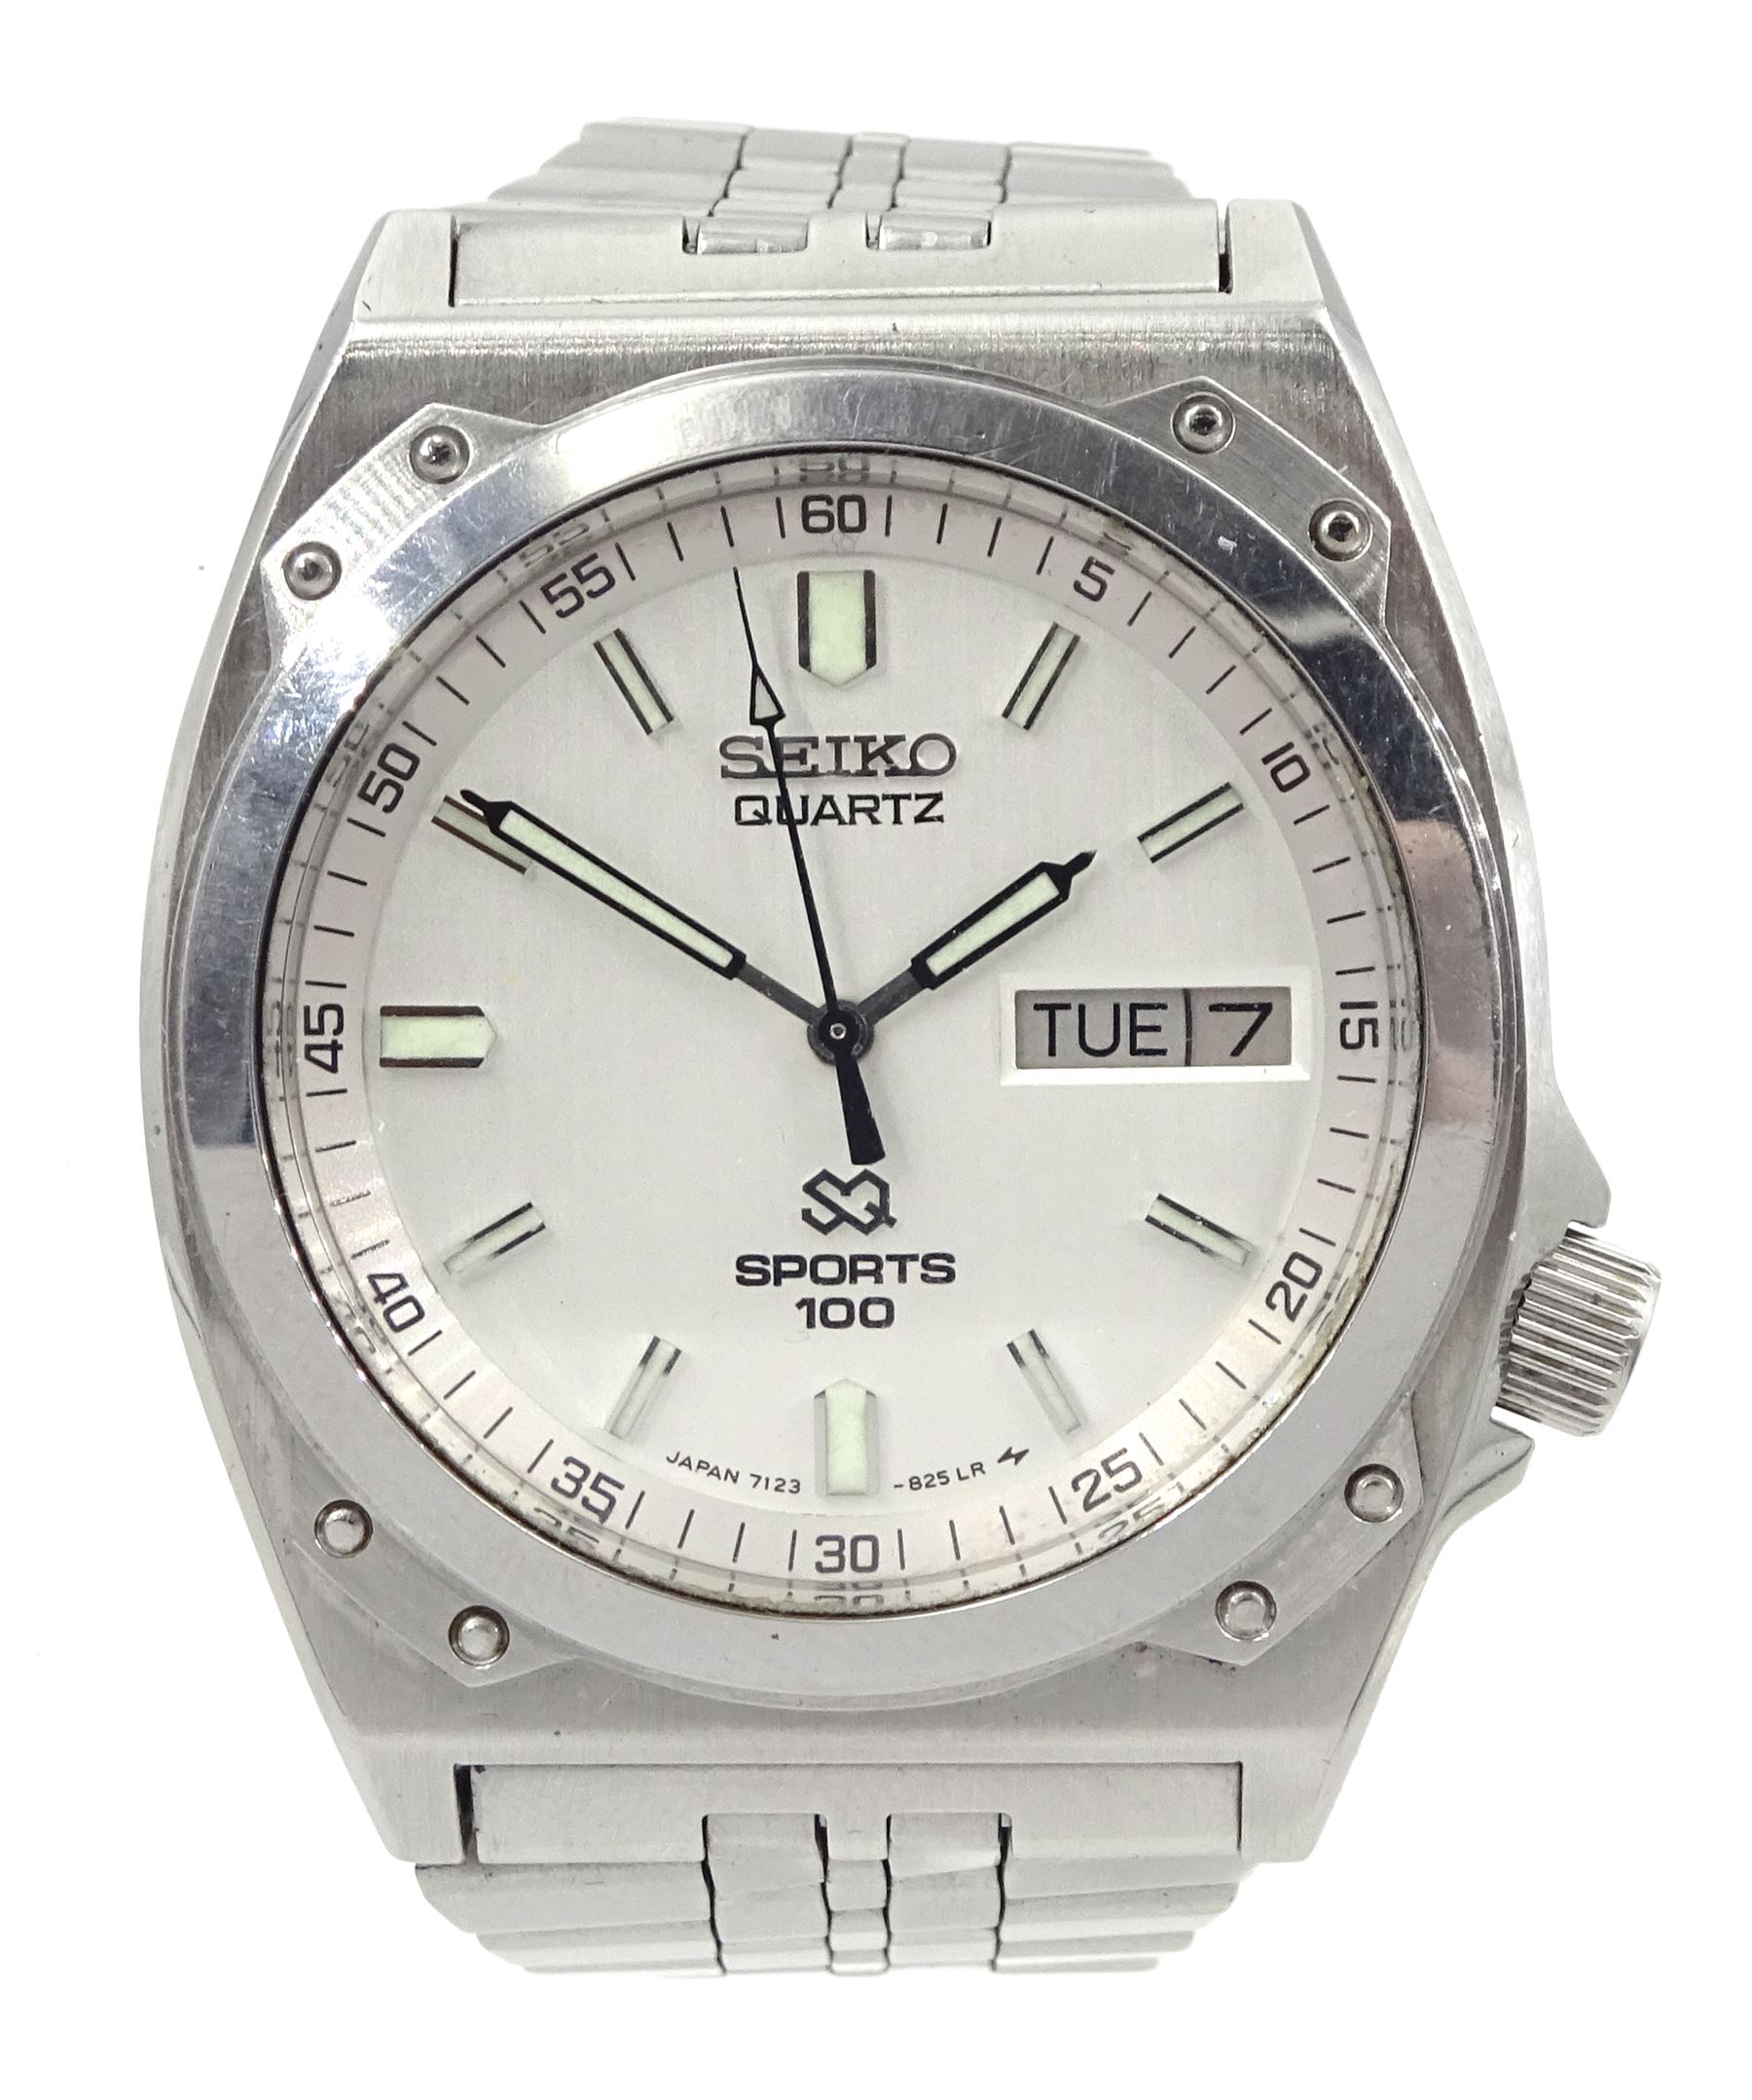 Seiko Quartz Sports 100 gentleman's wristwatch with day/date aperture,  model No. A 7123-8200, boxed - Jewellery, Watches & Coins